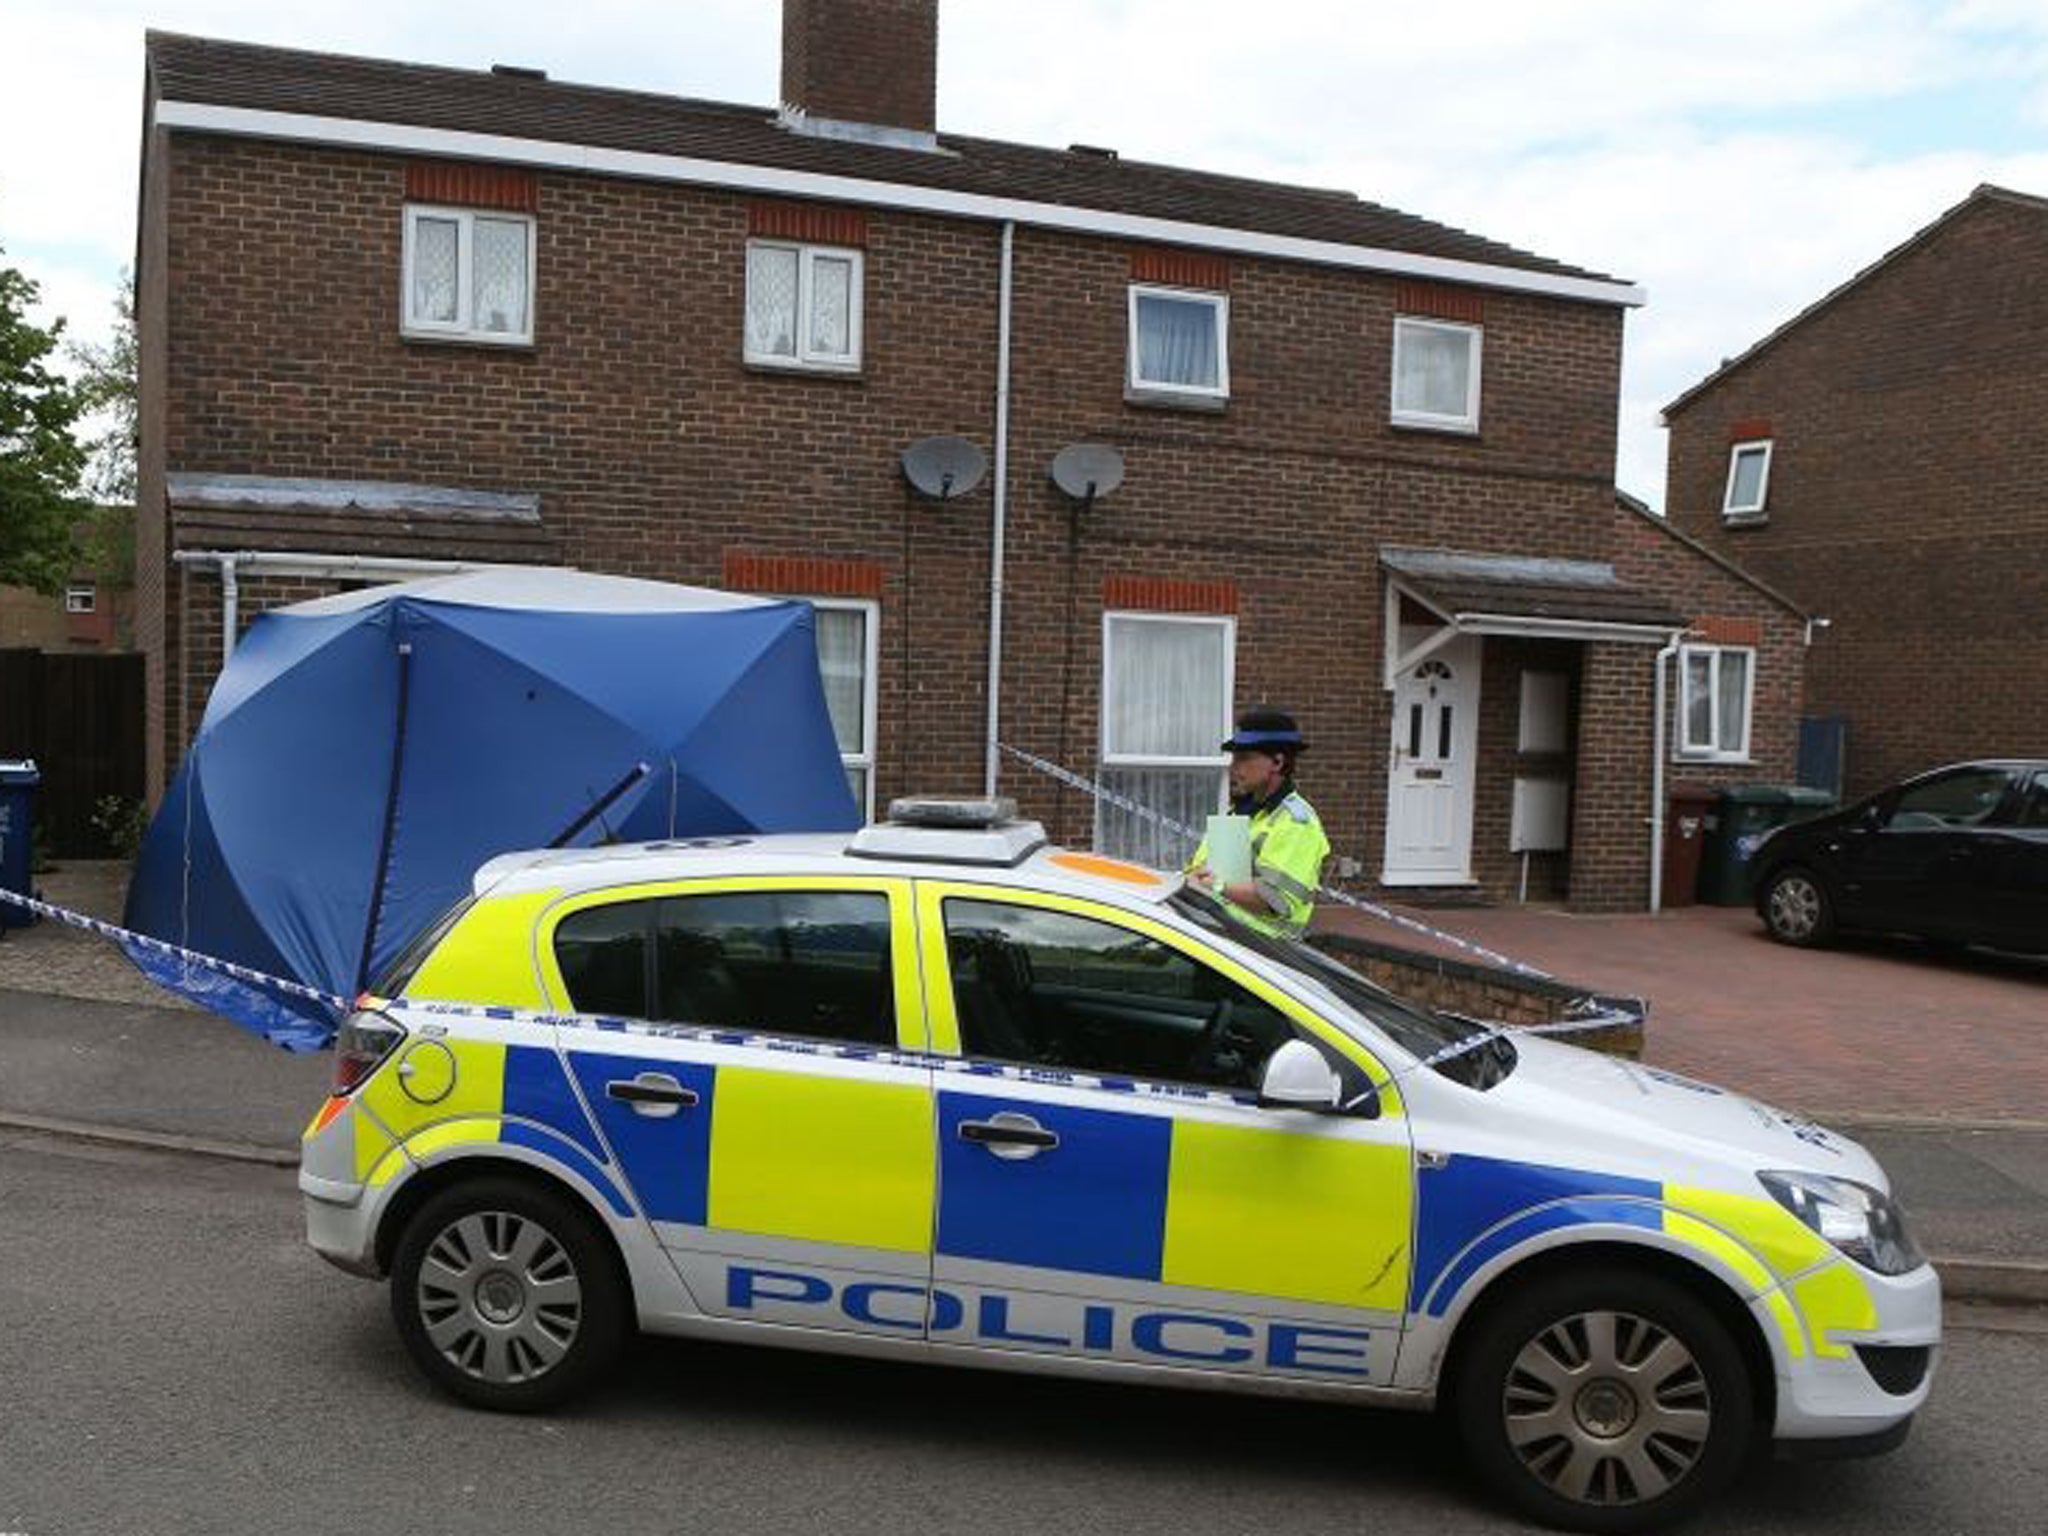 Police at the scene where the body of a two-year-old was found at a home after police were called to the address